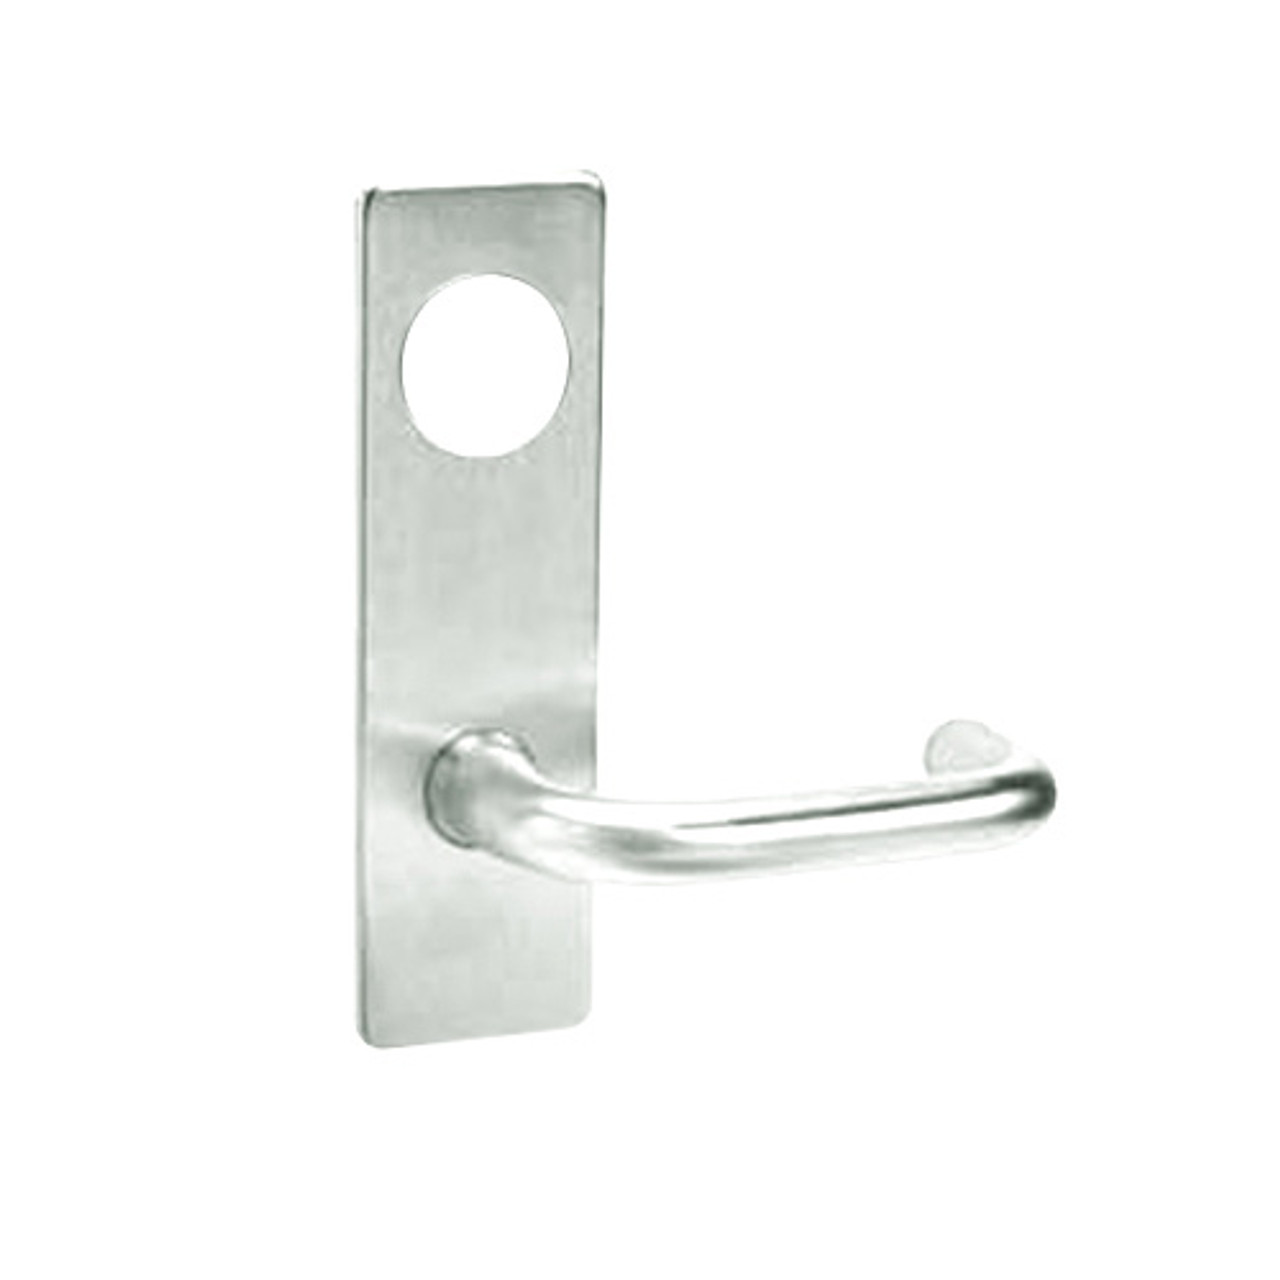 ML2056-LWR-618-LC Corbin Russwin ML2000 Series Mortise Classroom Locksets with Lustra Lever in Bright Nickel